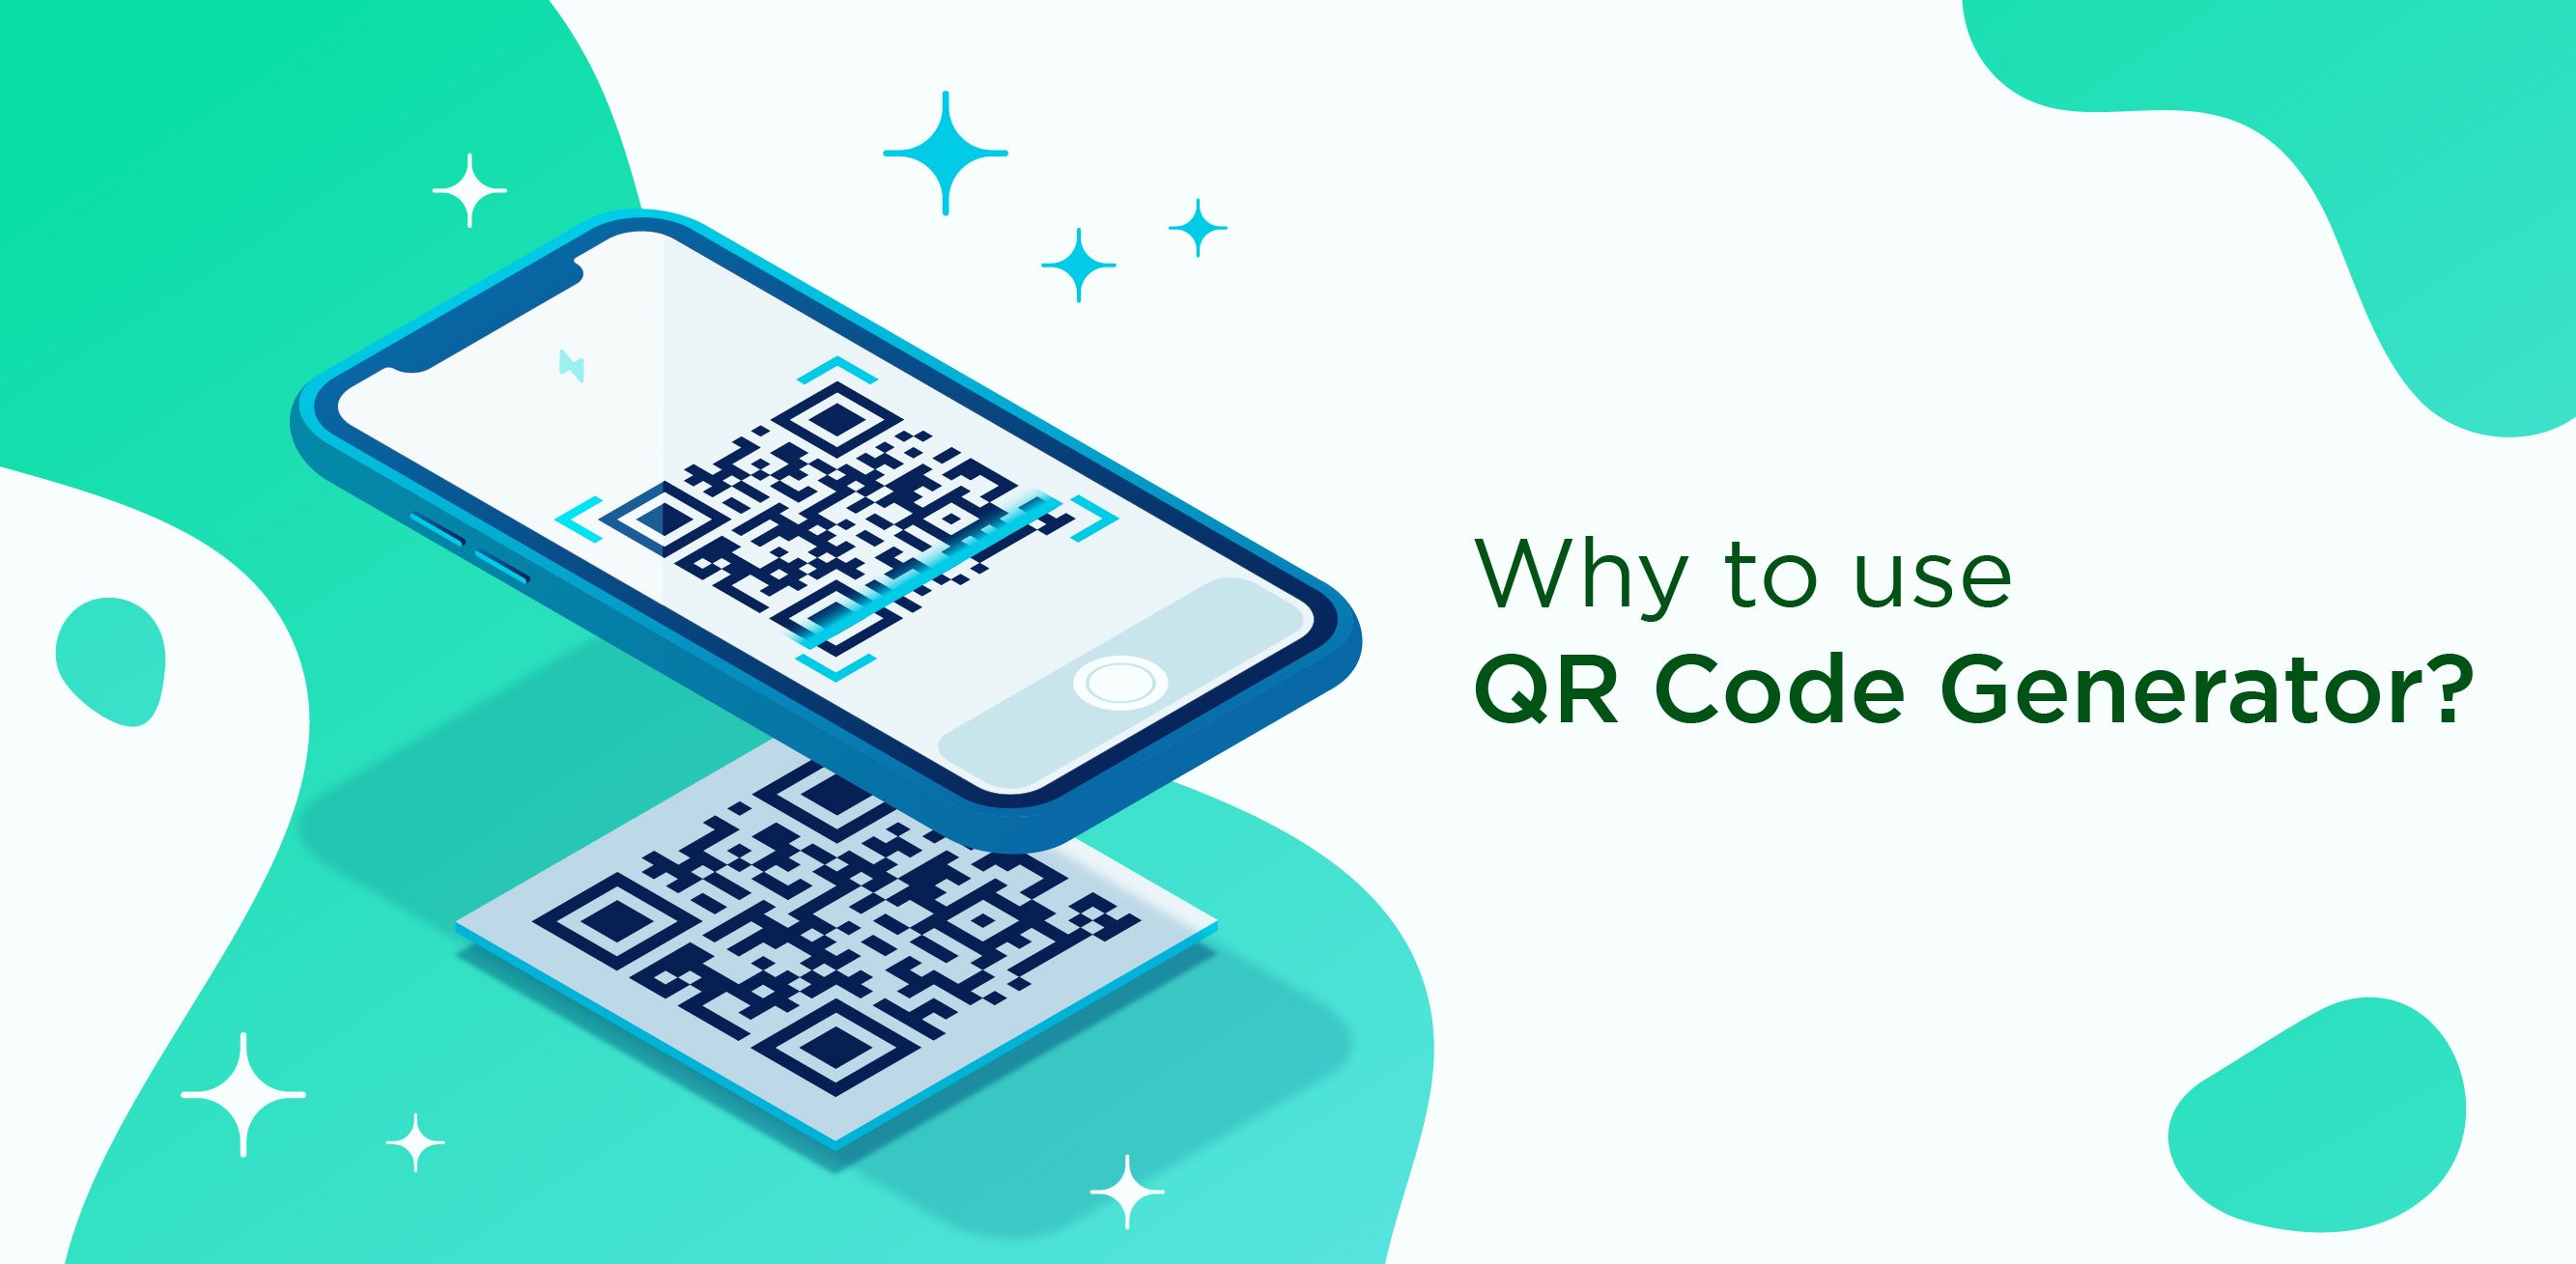 Why should I use the QR Code Generator to produce a WhatsApp QR Code?